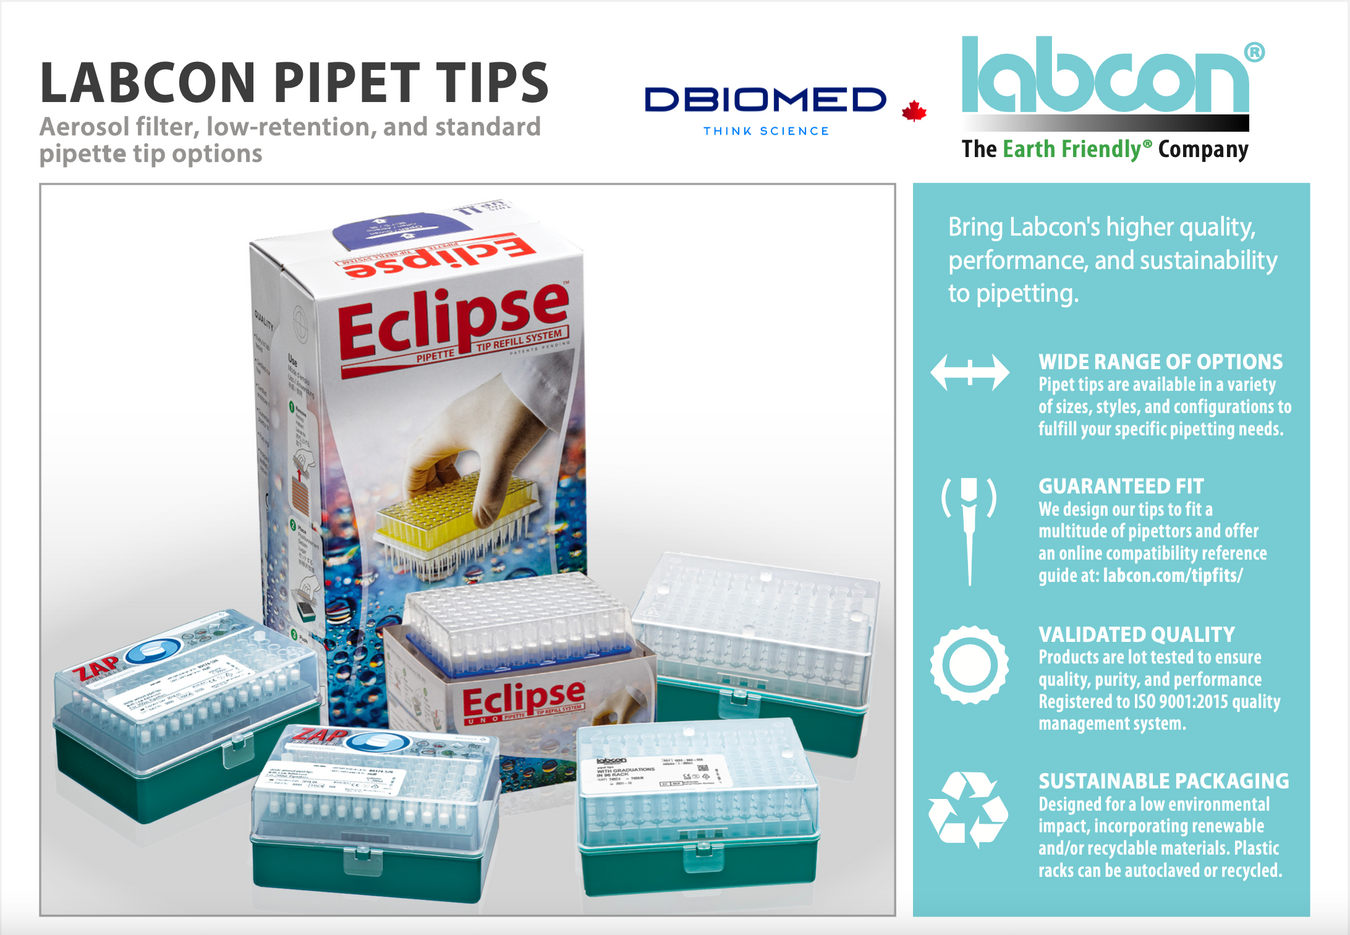 Labcon Filter, Low Retention and Standard pipette tip options product variant info sheet and graphic